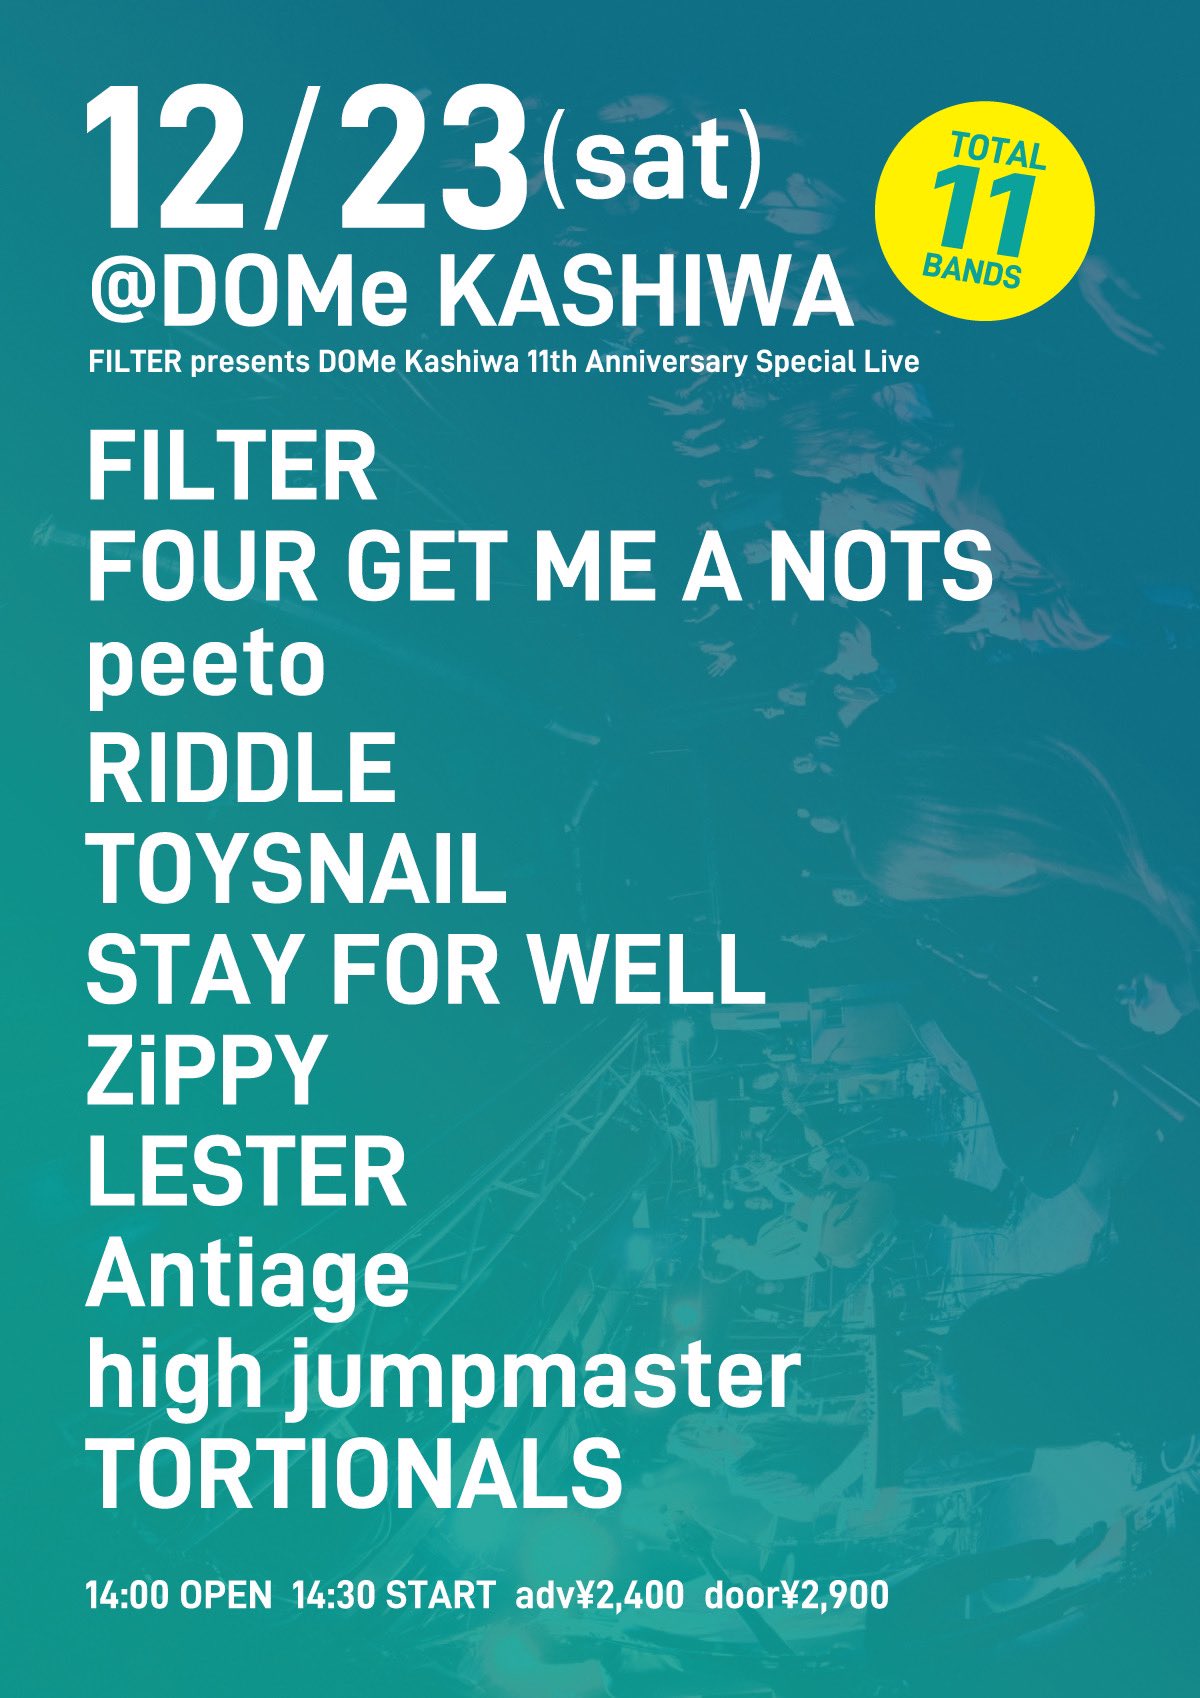 FILTER presents DOMe Kashiwa 11th Anniversary Special Live